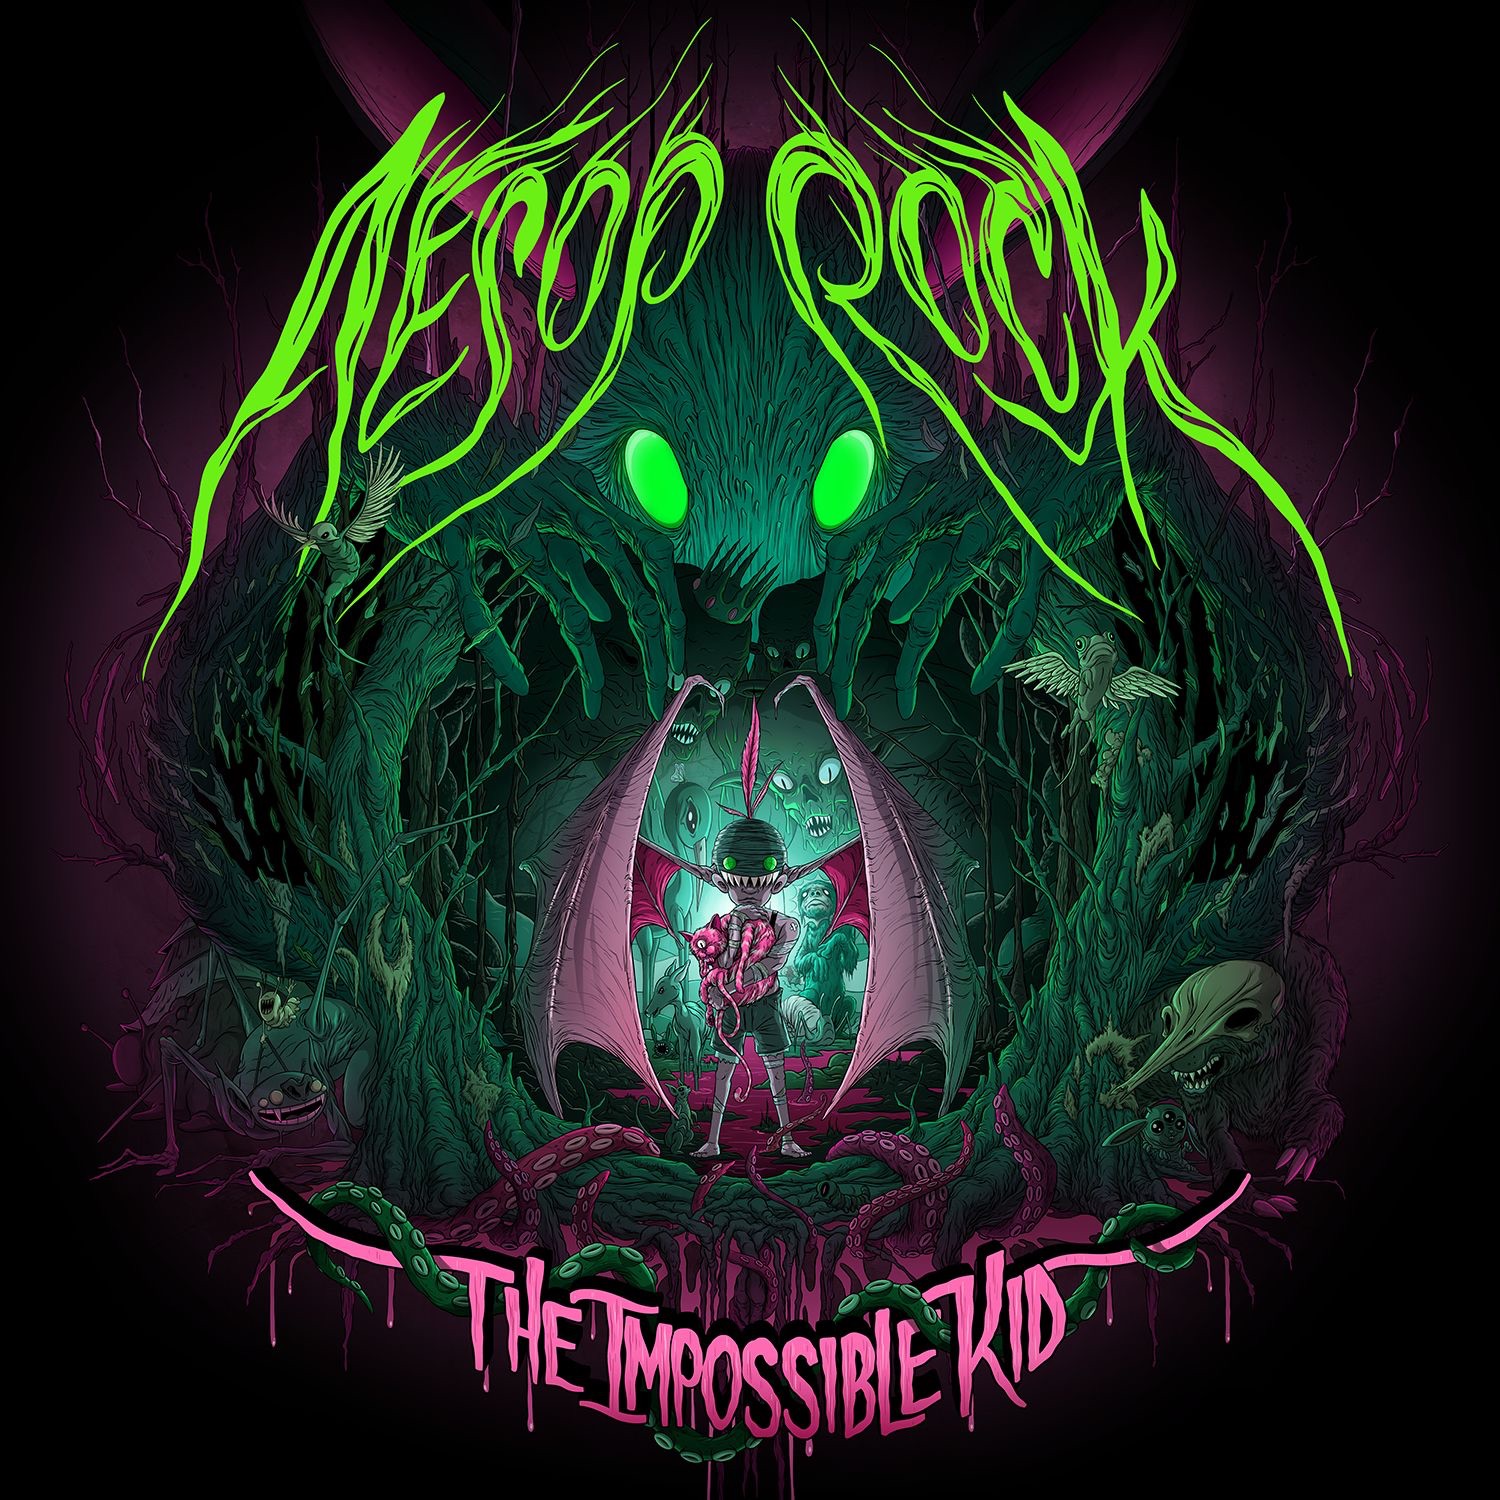 Aesop Rock - Get Out of the Car